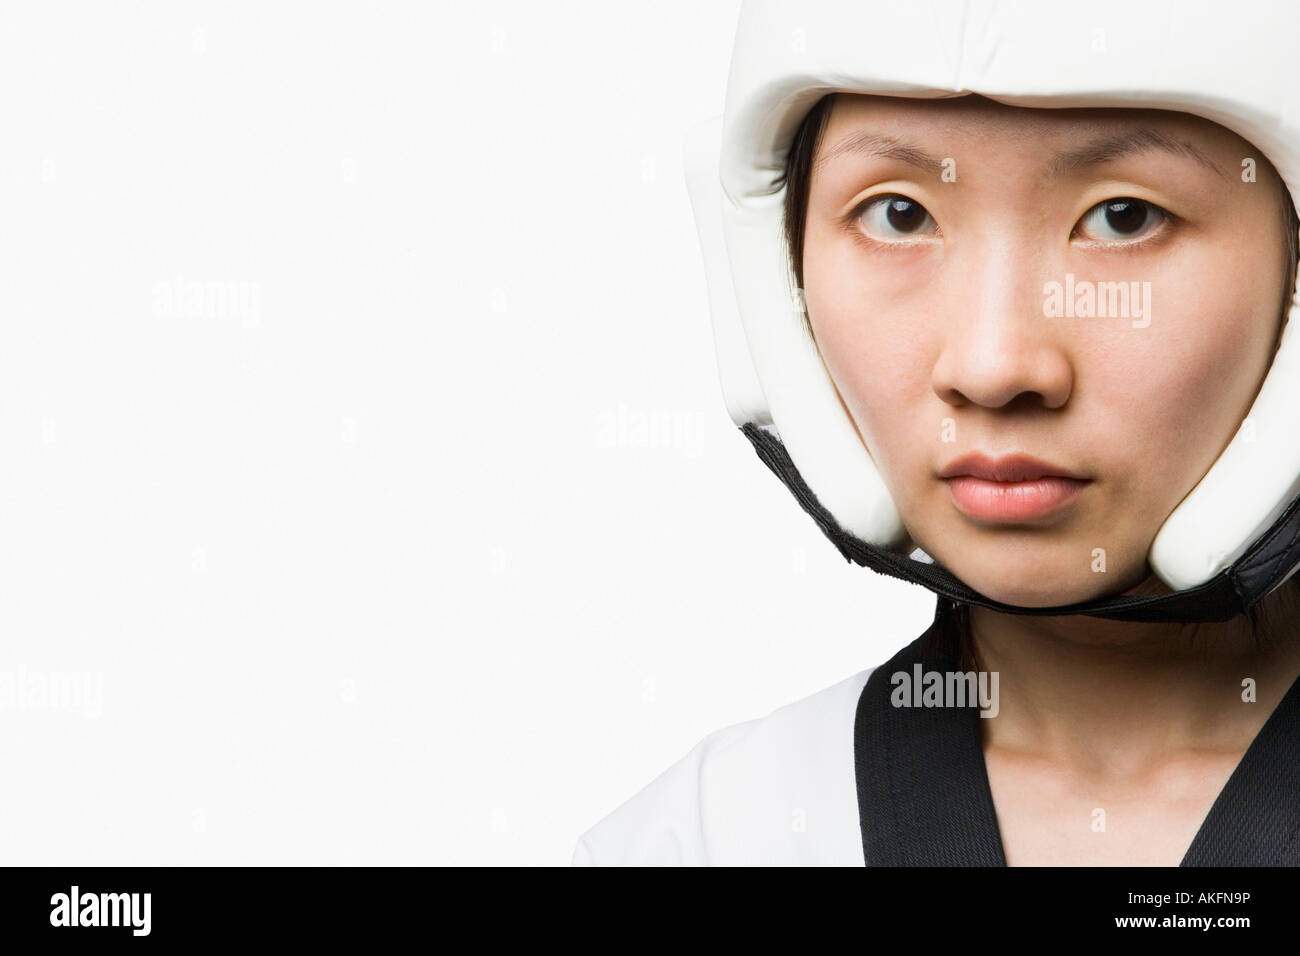 Portrait of a young woman wearing a sports helmet Stock Photo